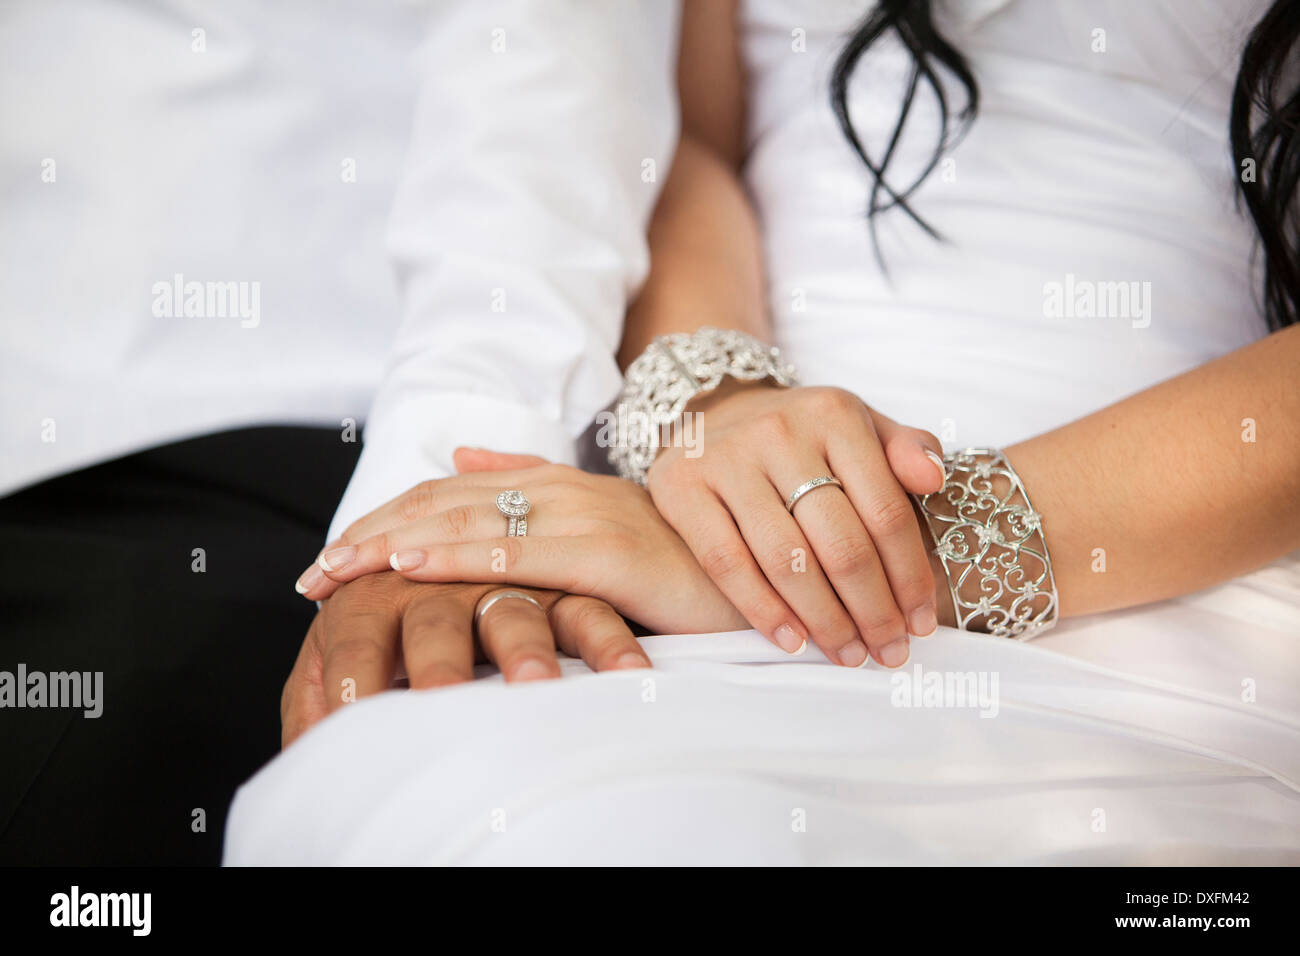 Close-up of Bride and Groom's hands, Wedding Day, Ontario, Canada Stock Photo